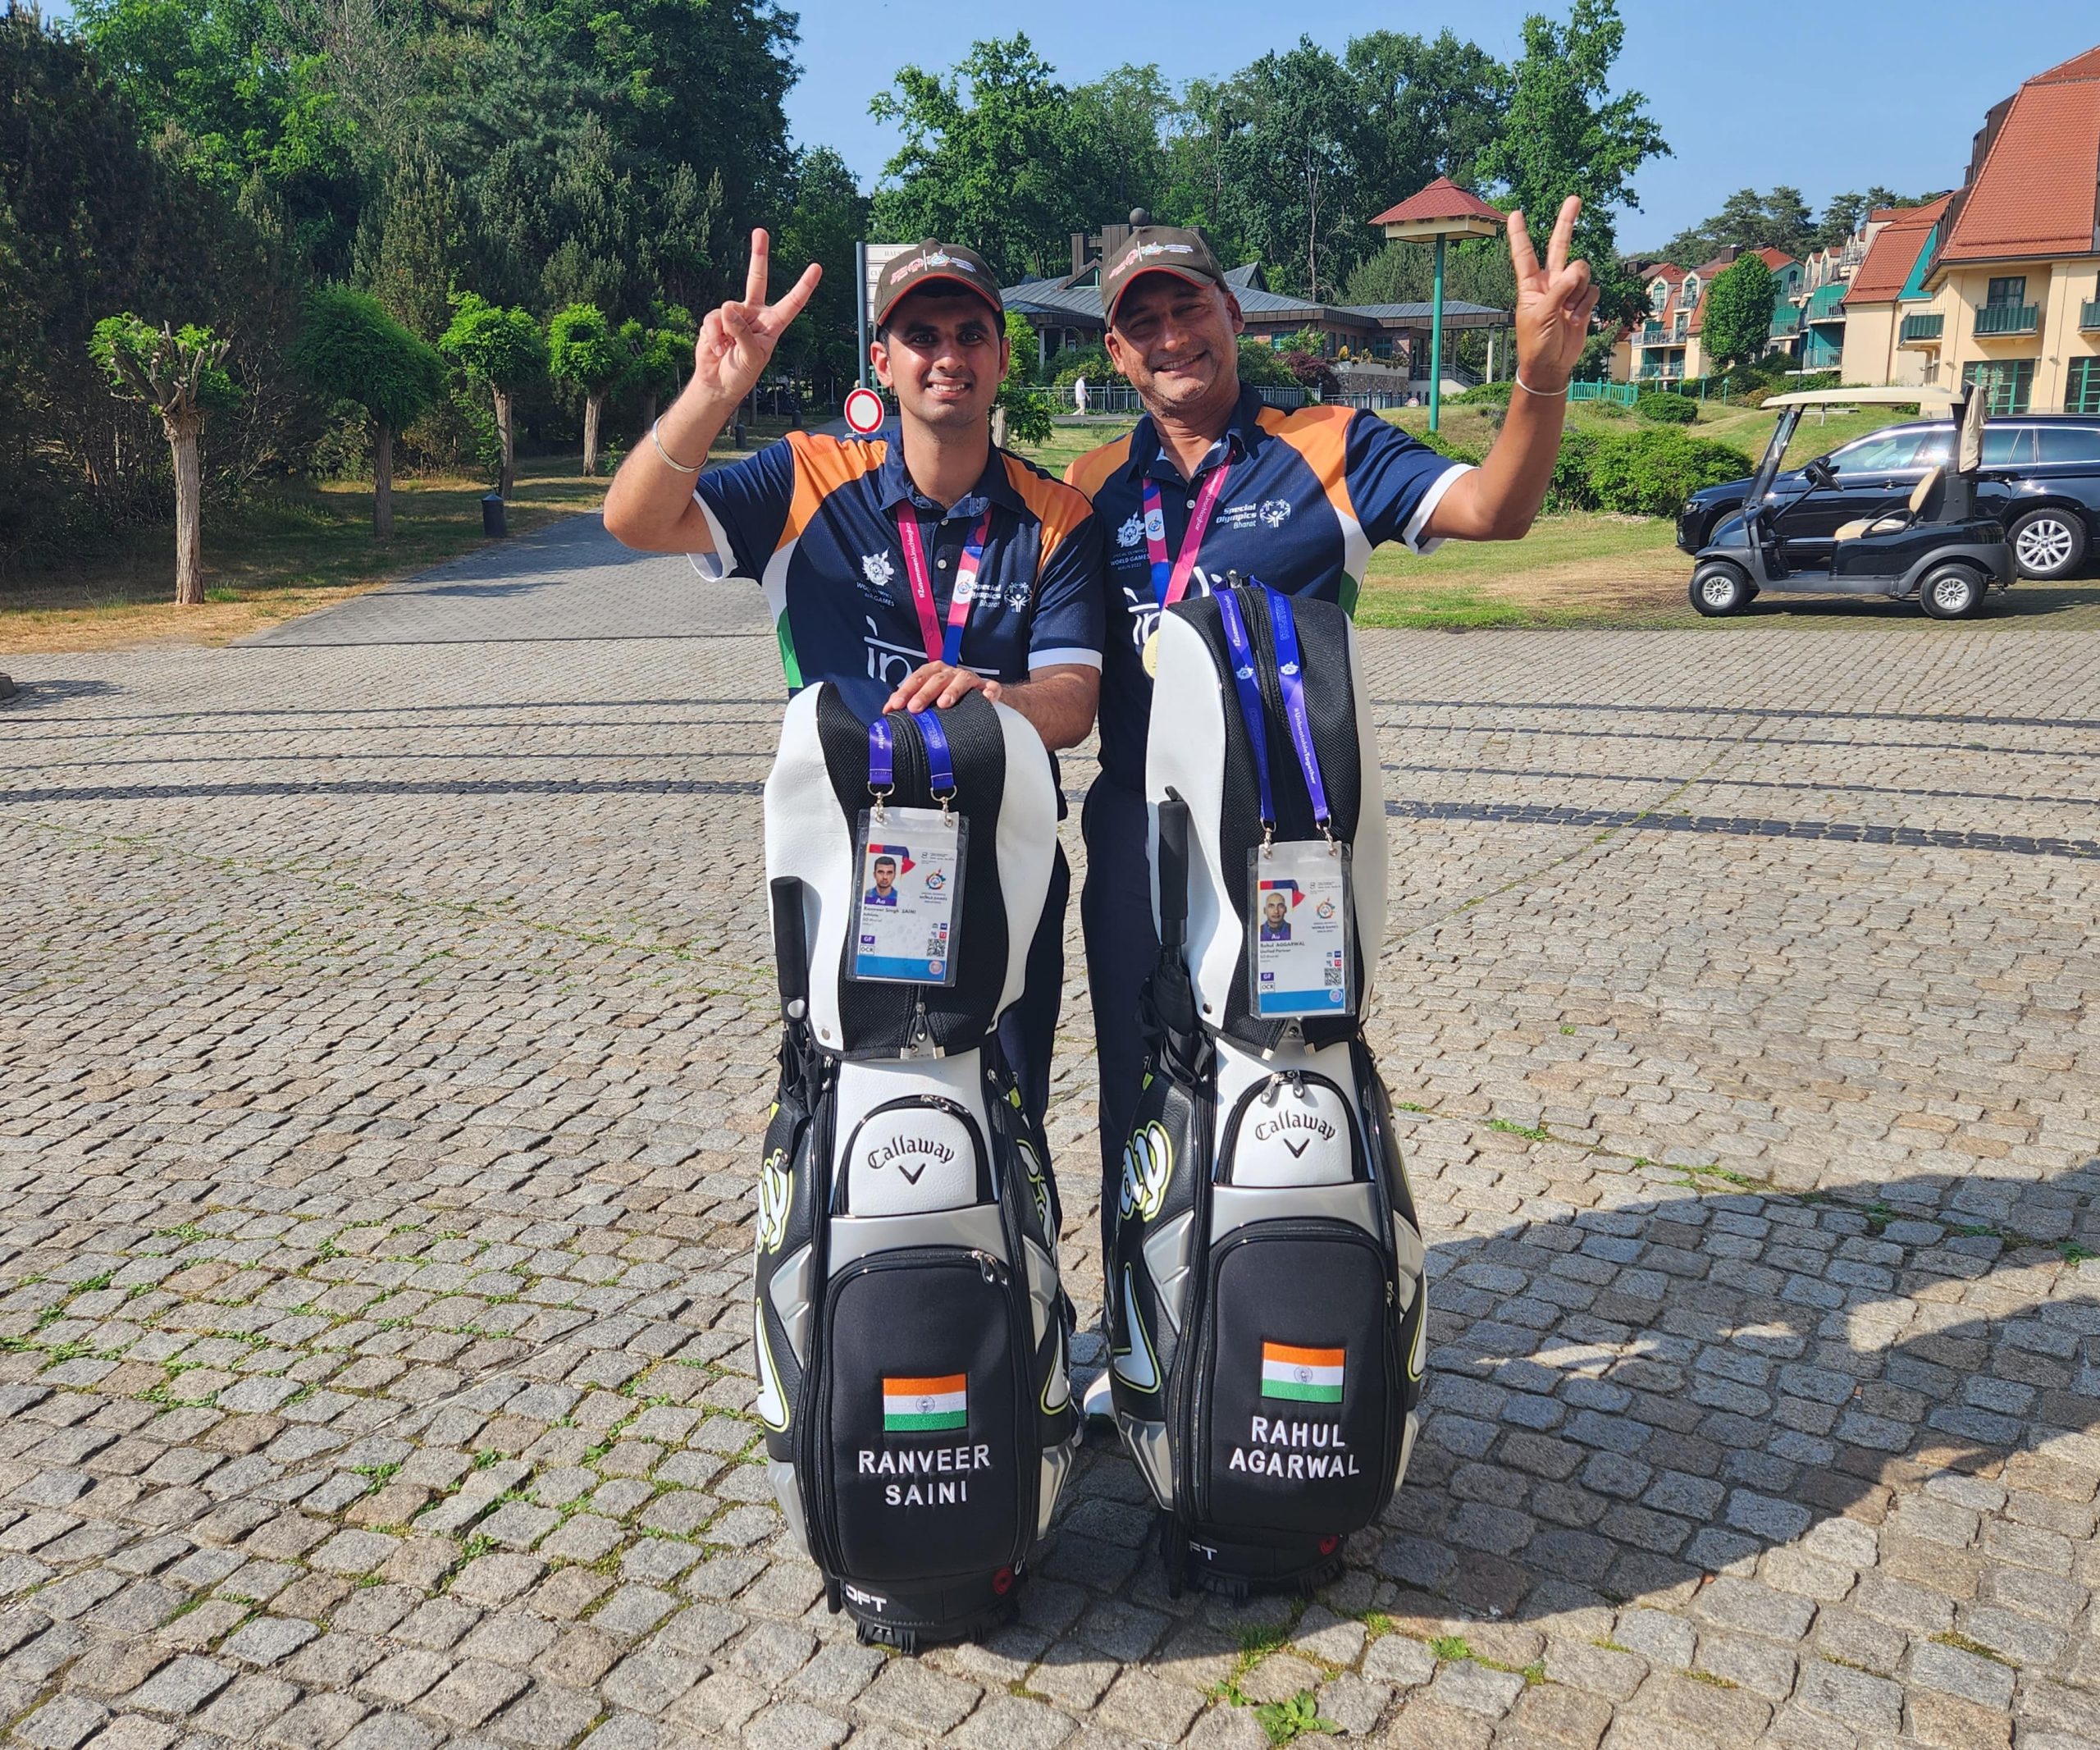 Ranveer Singh Saini and Rahul Agrawal won gold medals at the Special Olympics World Games Berlin 2023